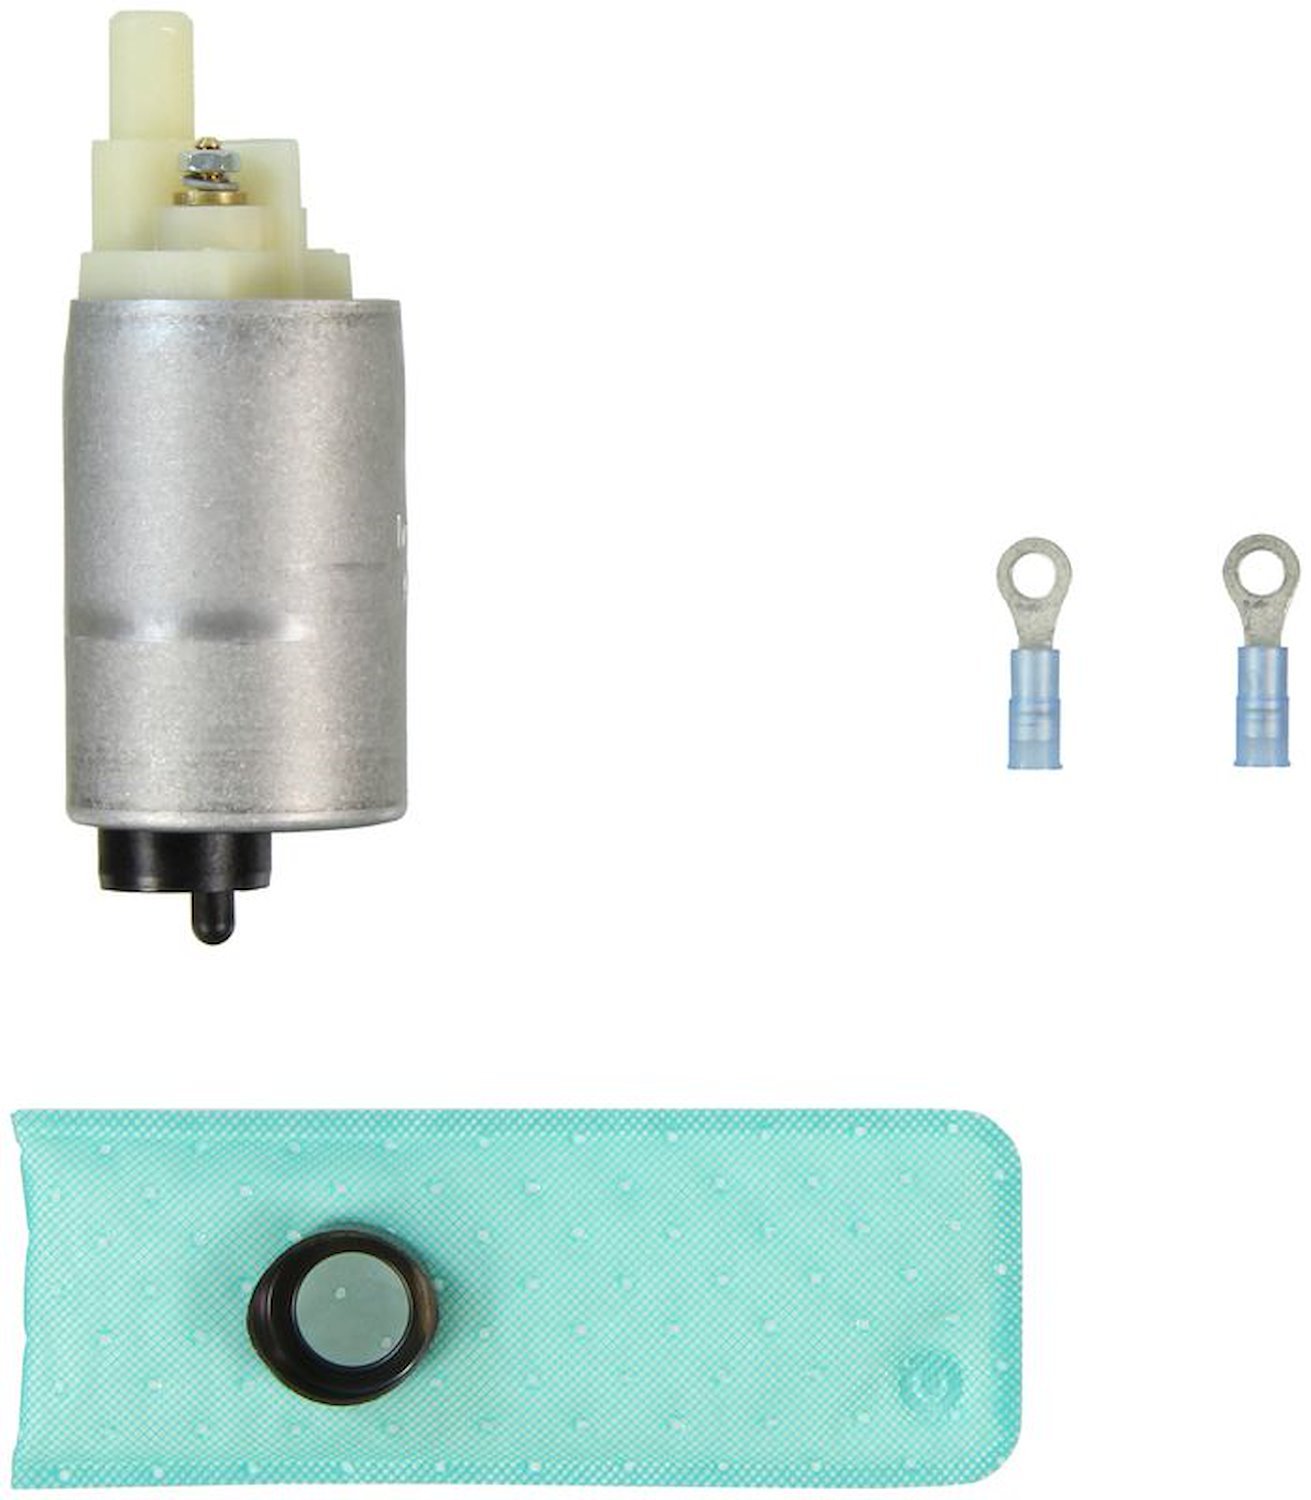 EFI In-Tank Electric Fuel Pump And Strainer Set for 1985-1993 Volkswagen